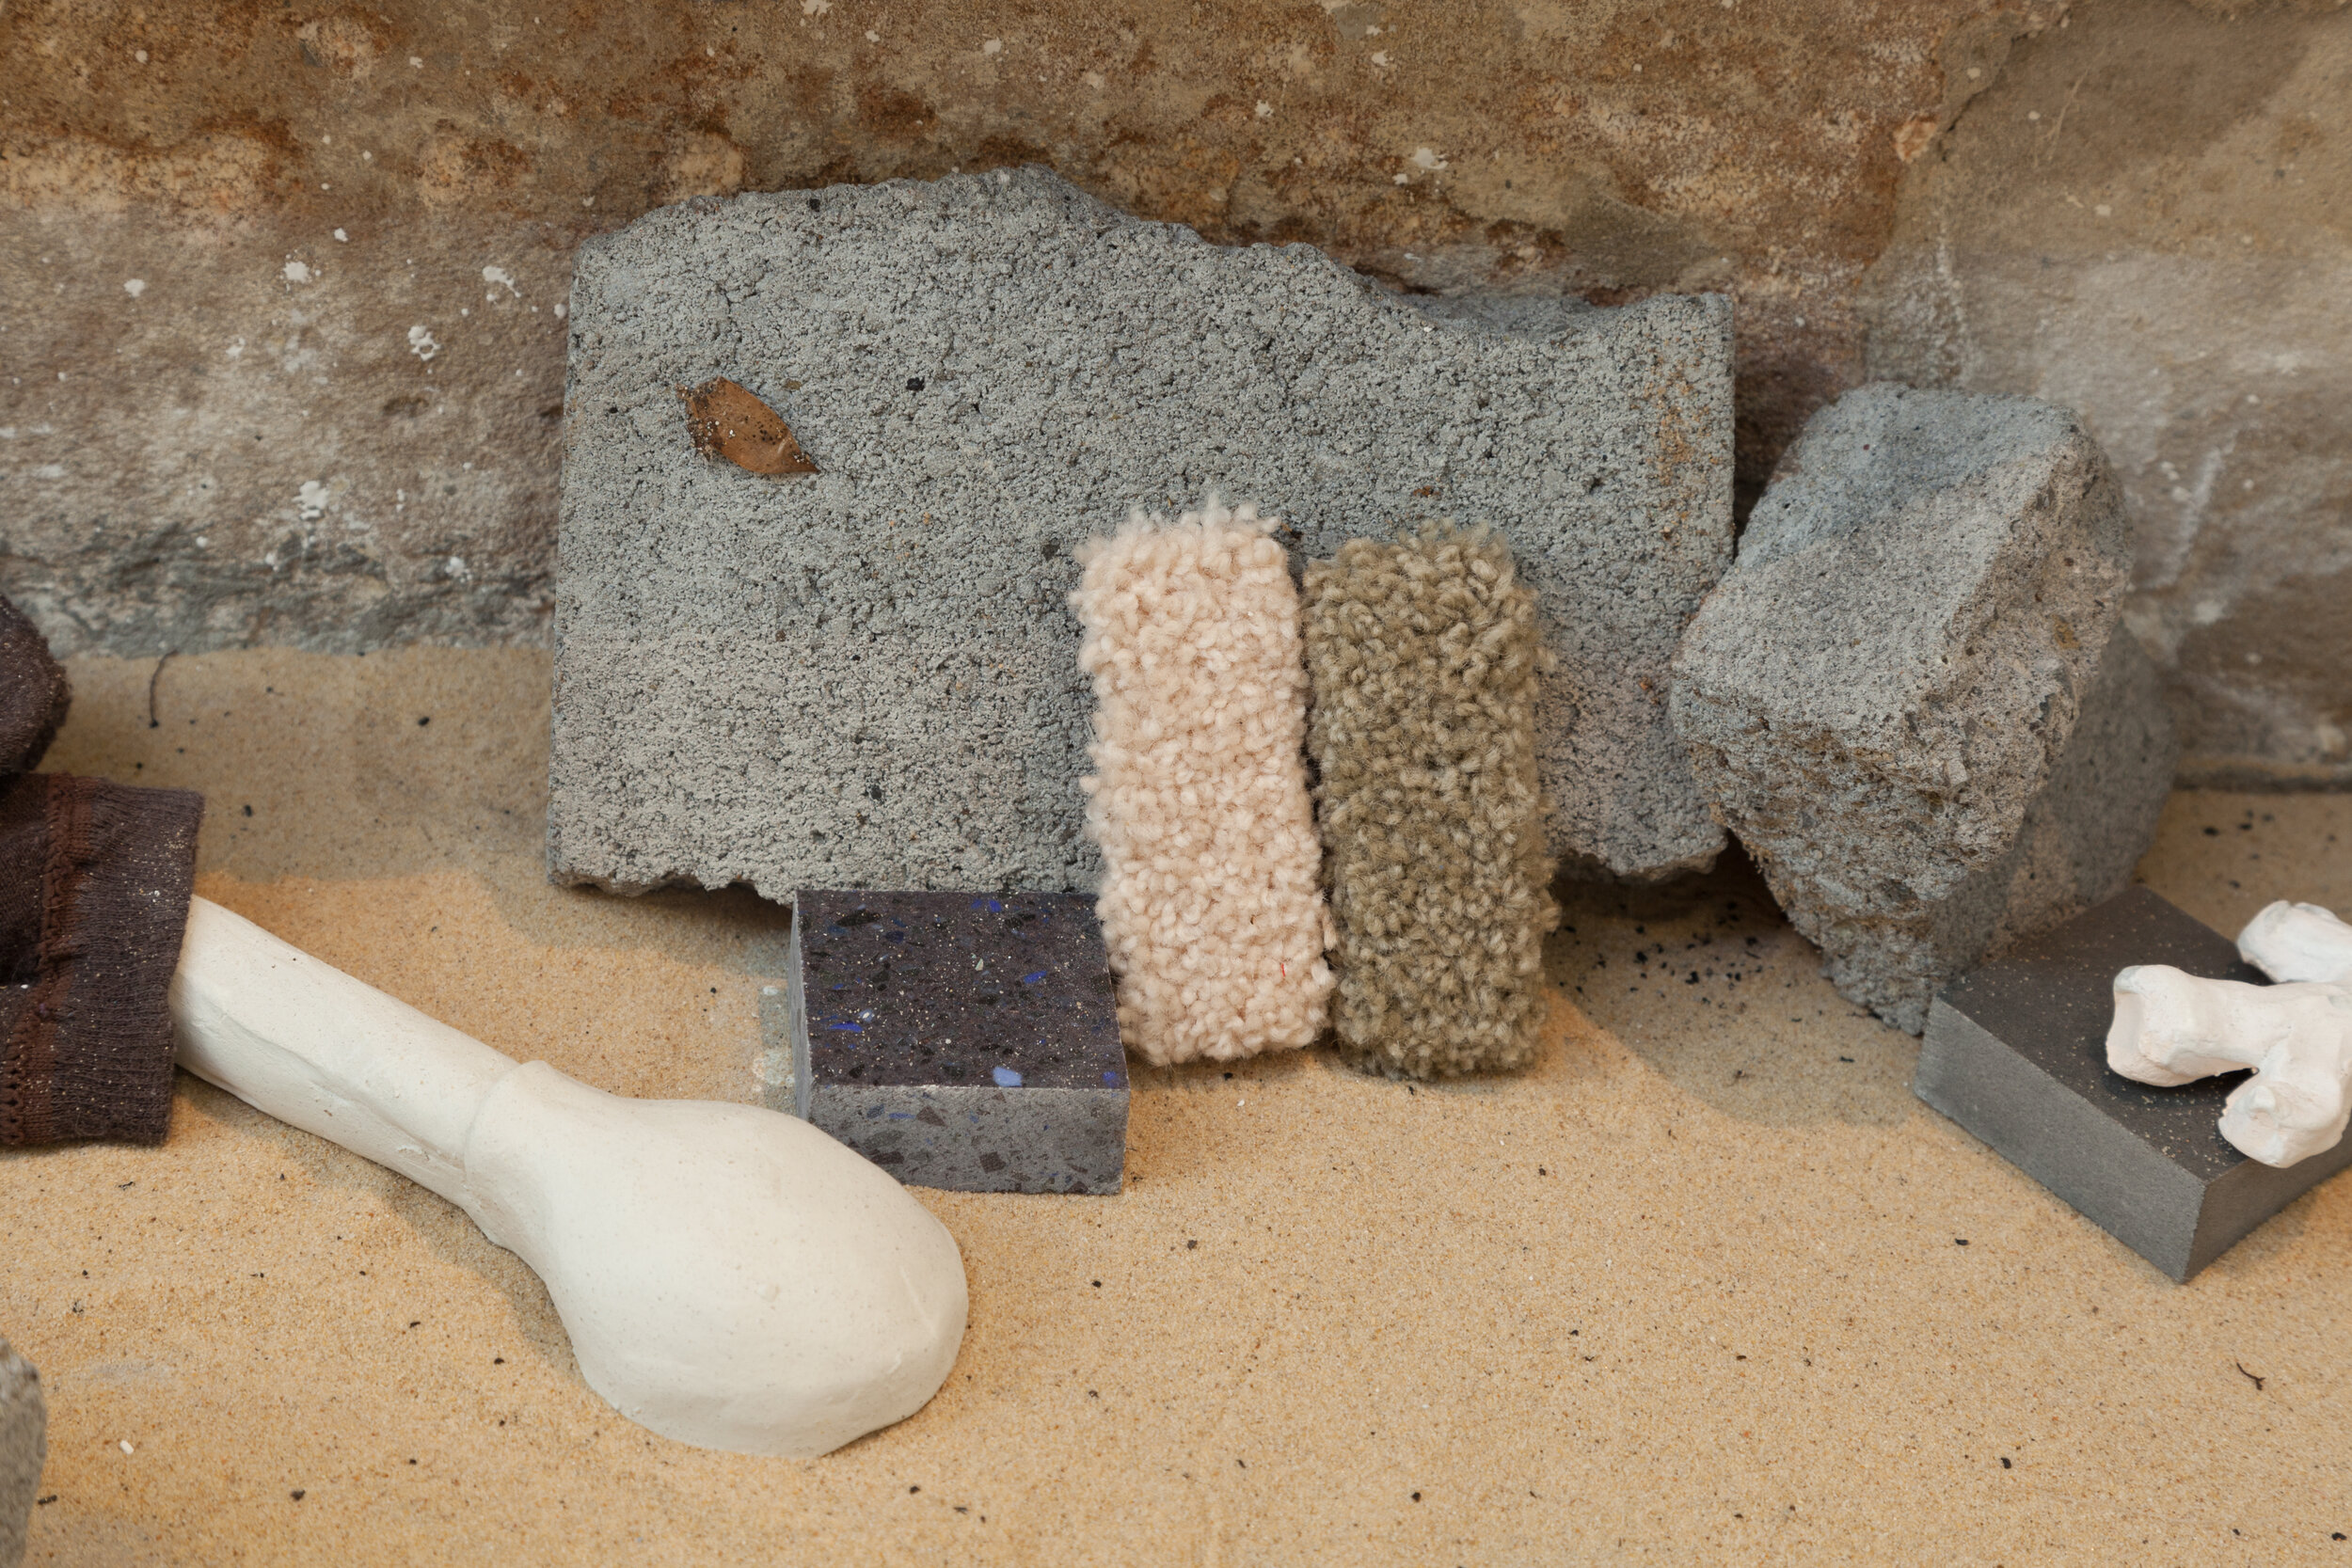  Some Dust in the Balance, 2014 (detail)  earthenware, acrylic, sand, found objects    Photo: Nick De Lorenzo 